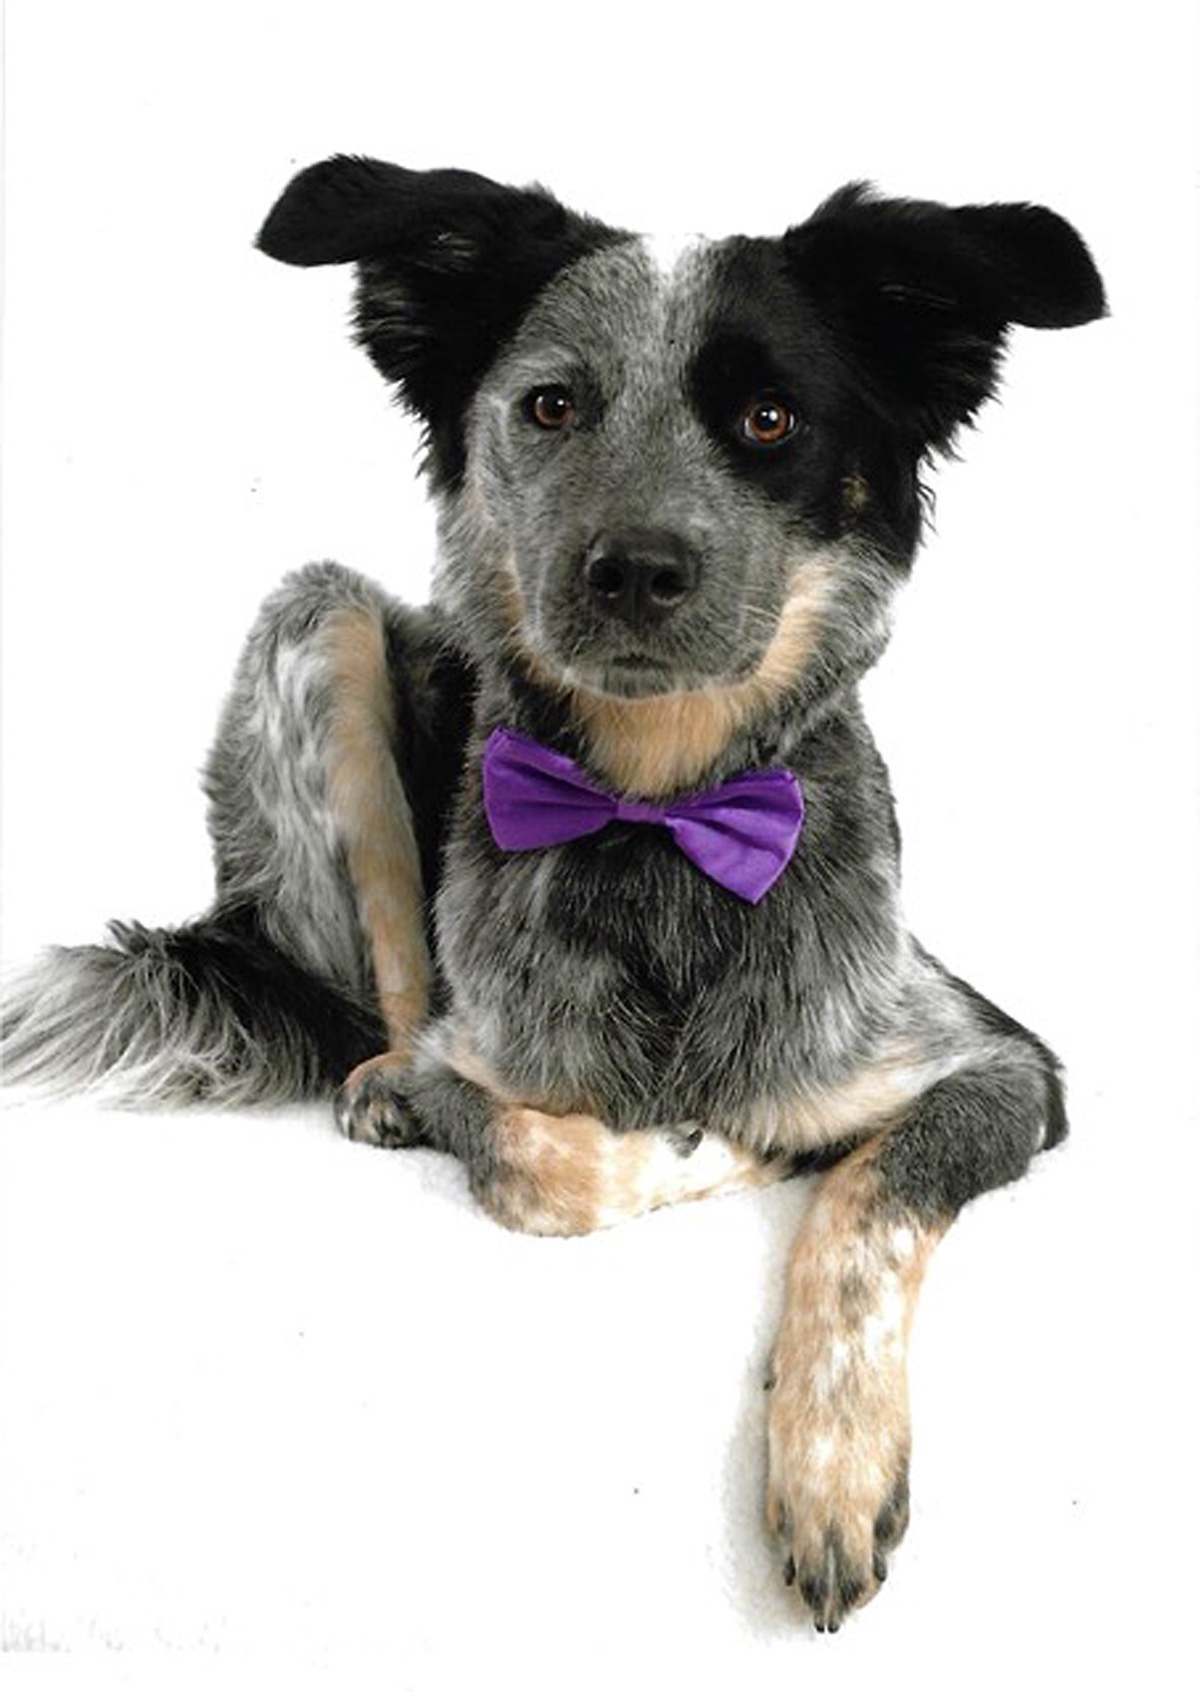 This is Milo, a blue heeler/Aussie shepherd rescue from Oklahoma. This was his "official" photo for a Cutest Pet Contest fundraiser for the local ASPCA. He won first place! We think it was the ears that put him over the top.